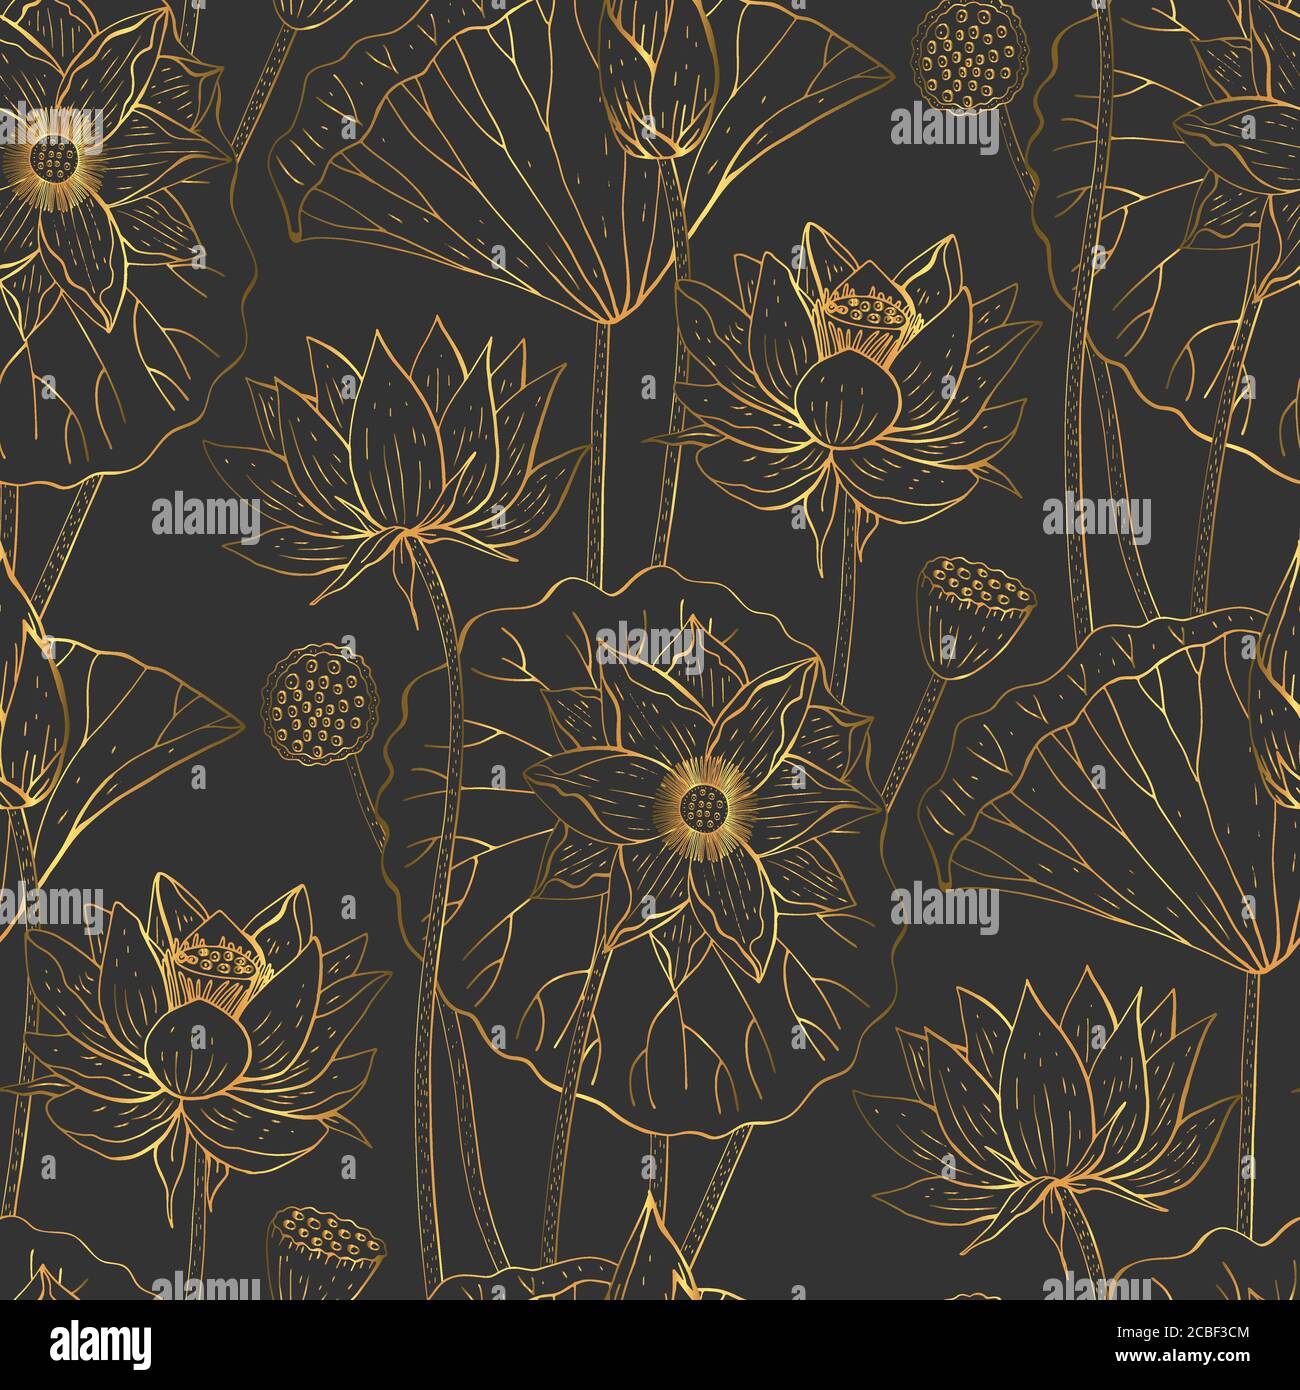 Golden floral seamless pattern with hand drawn lotus flowers and leaves on black background. Stock vector Stock Vector